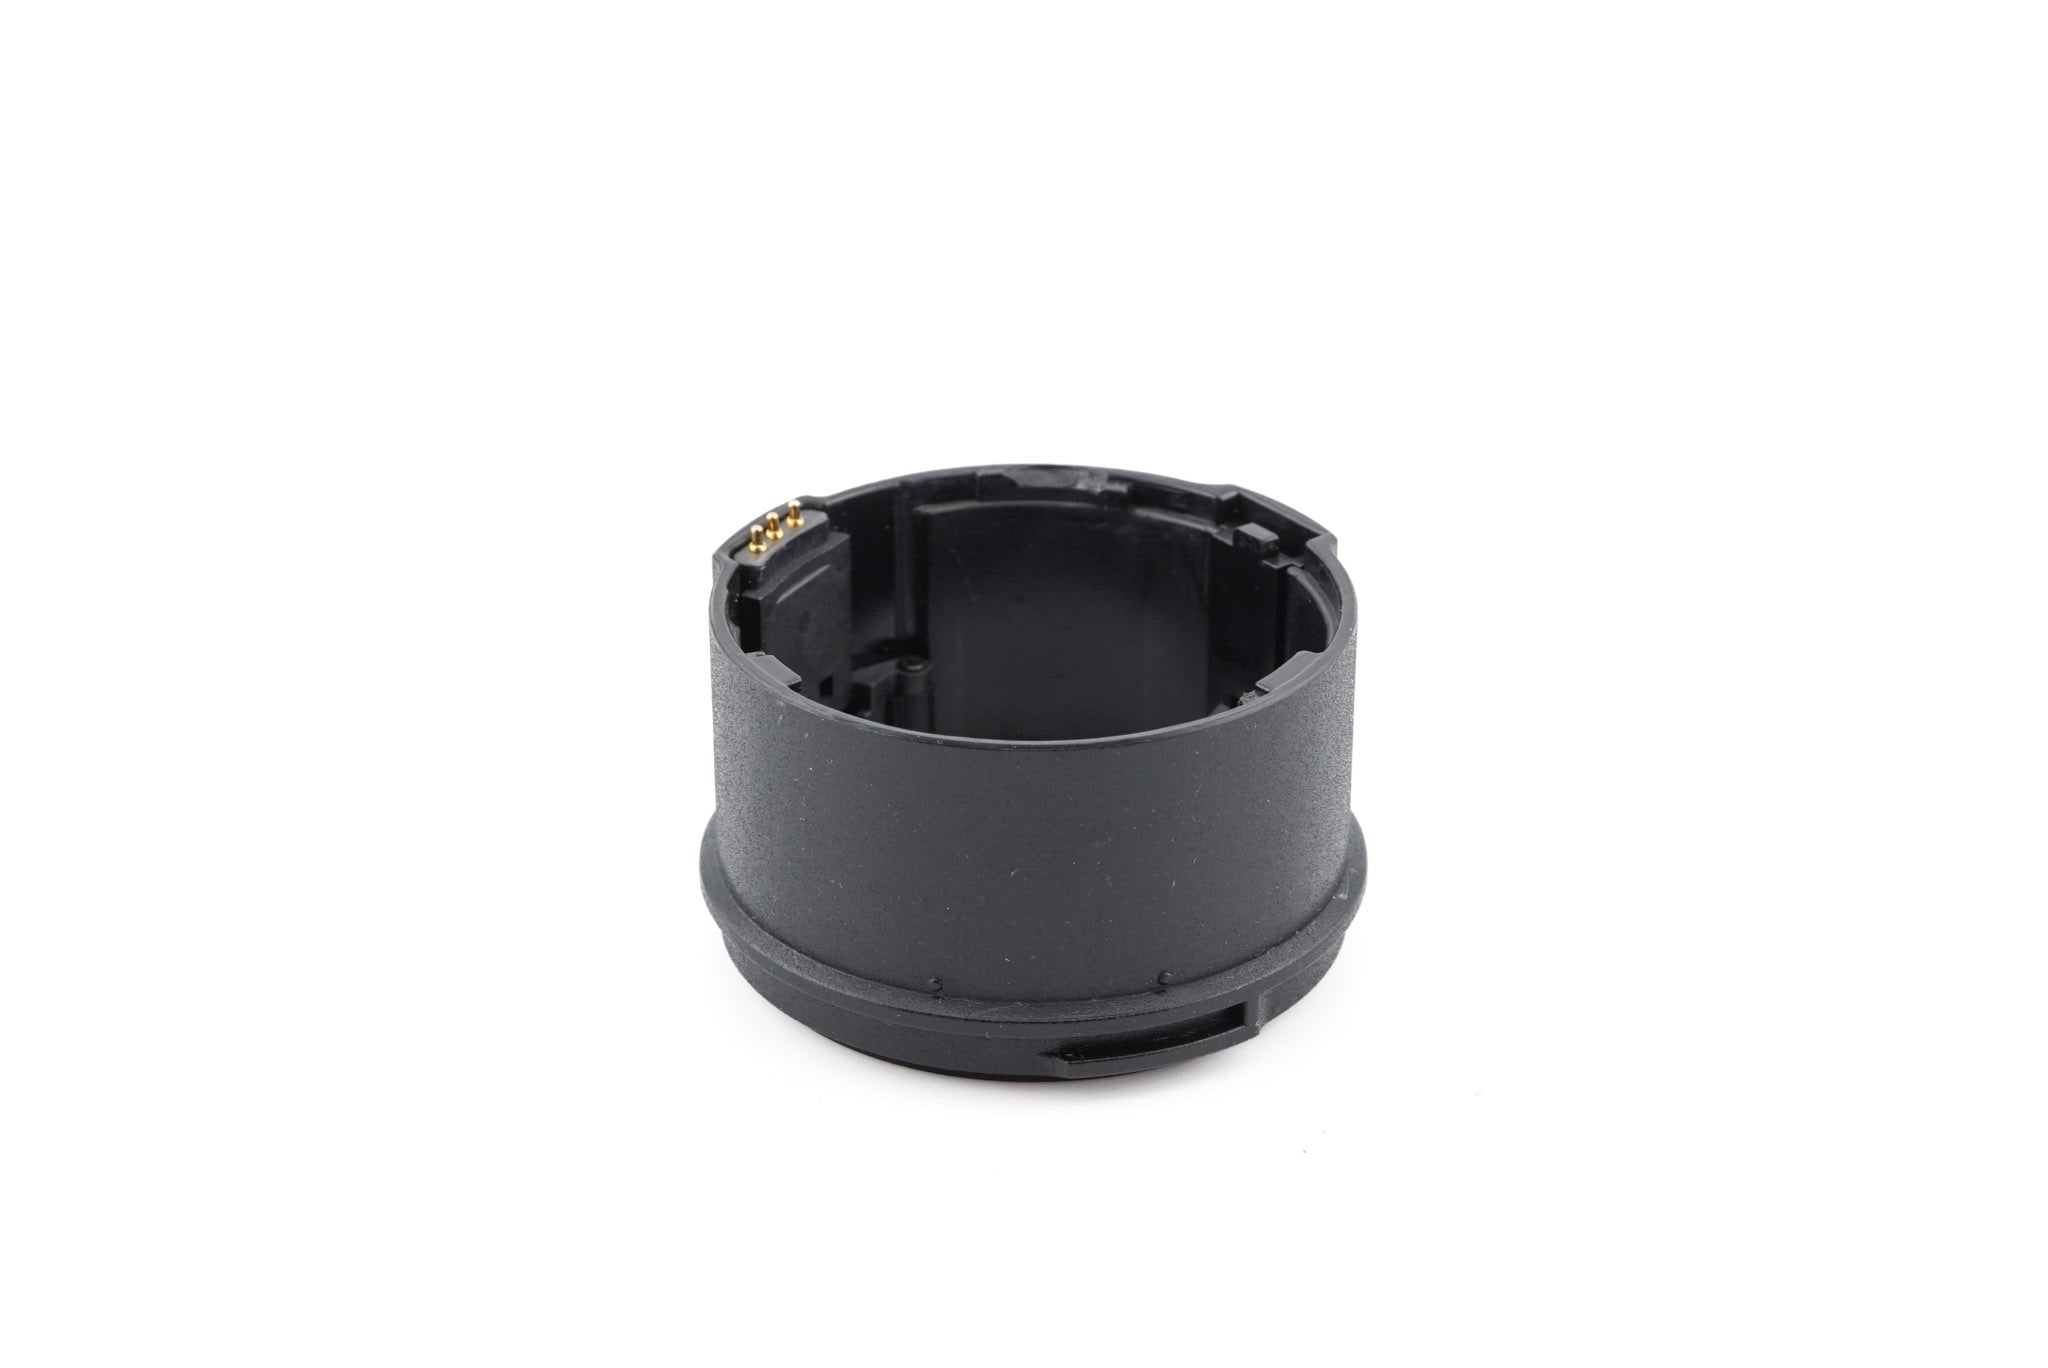 Ricoh 0.75x GW-2 Wide-Angle Conversion Lens + GH-2 43mm Adapter 